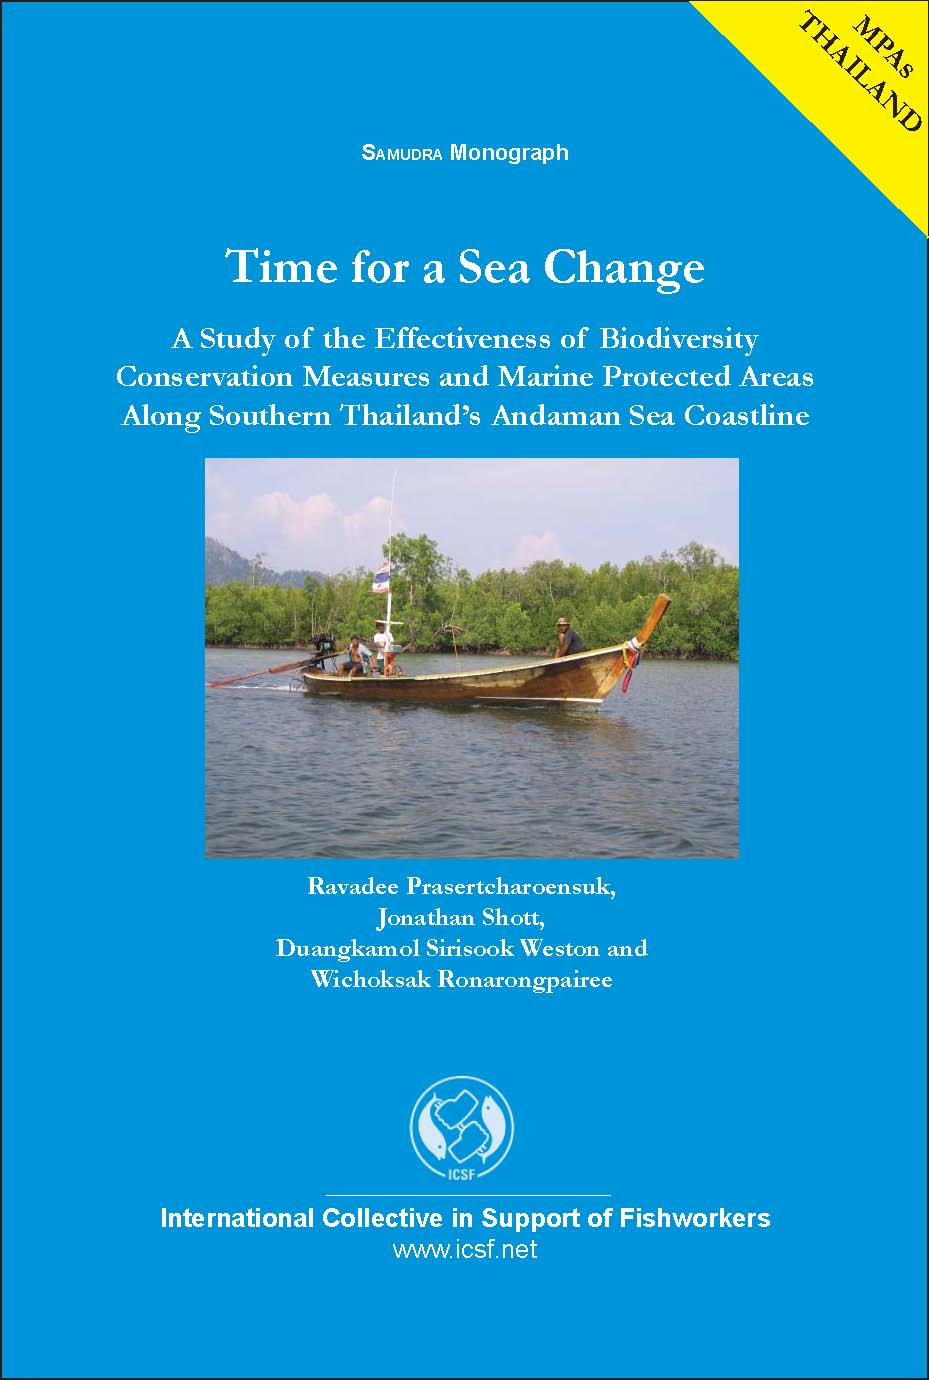 Marine Protected Areas in Thailand: Time for a Sea Change: A Study of the Effectiveness of Biodiversity Conservation Measures and Marine Protected Areas Along Southern Thailand’s Andaman Sea Coastline